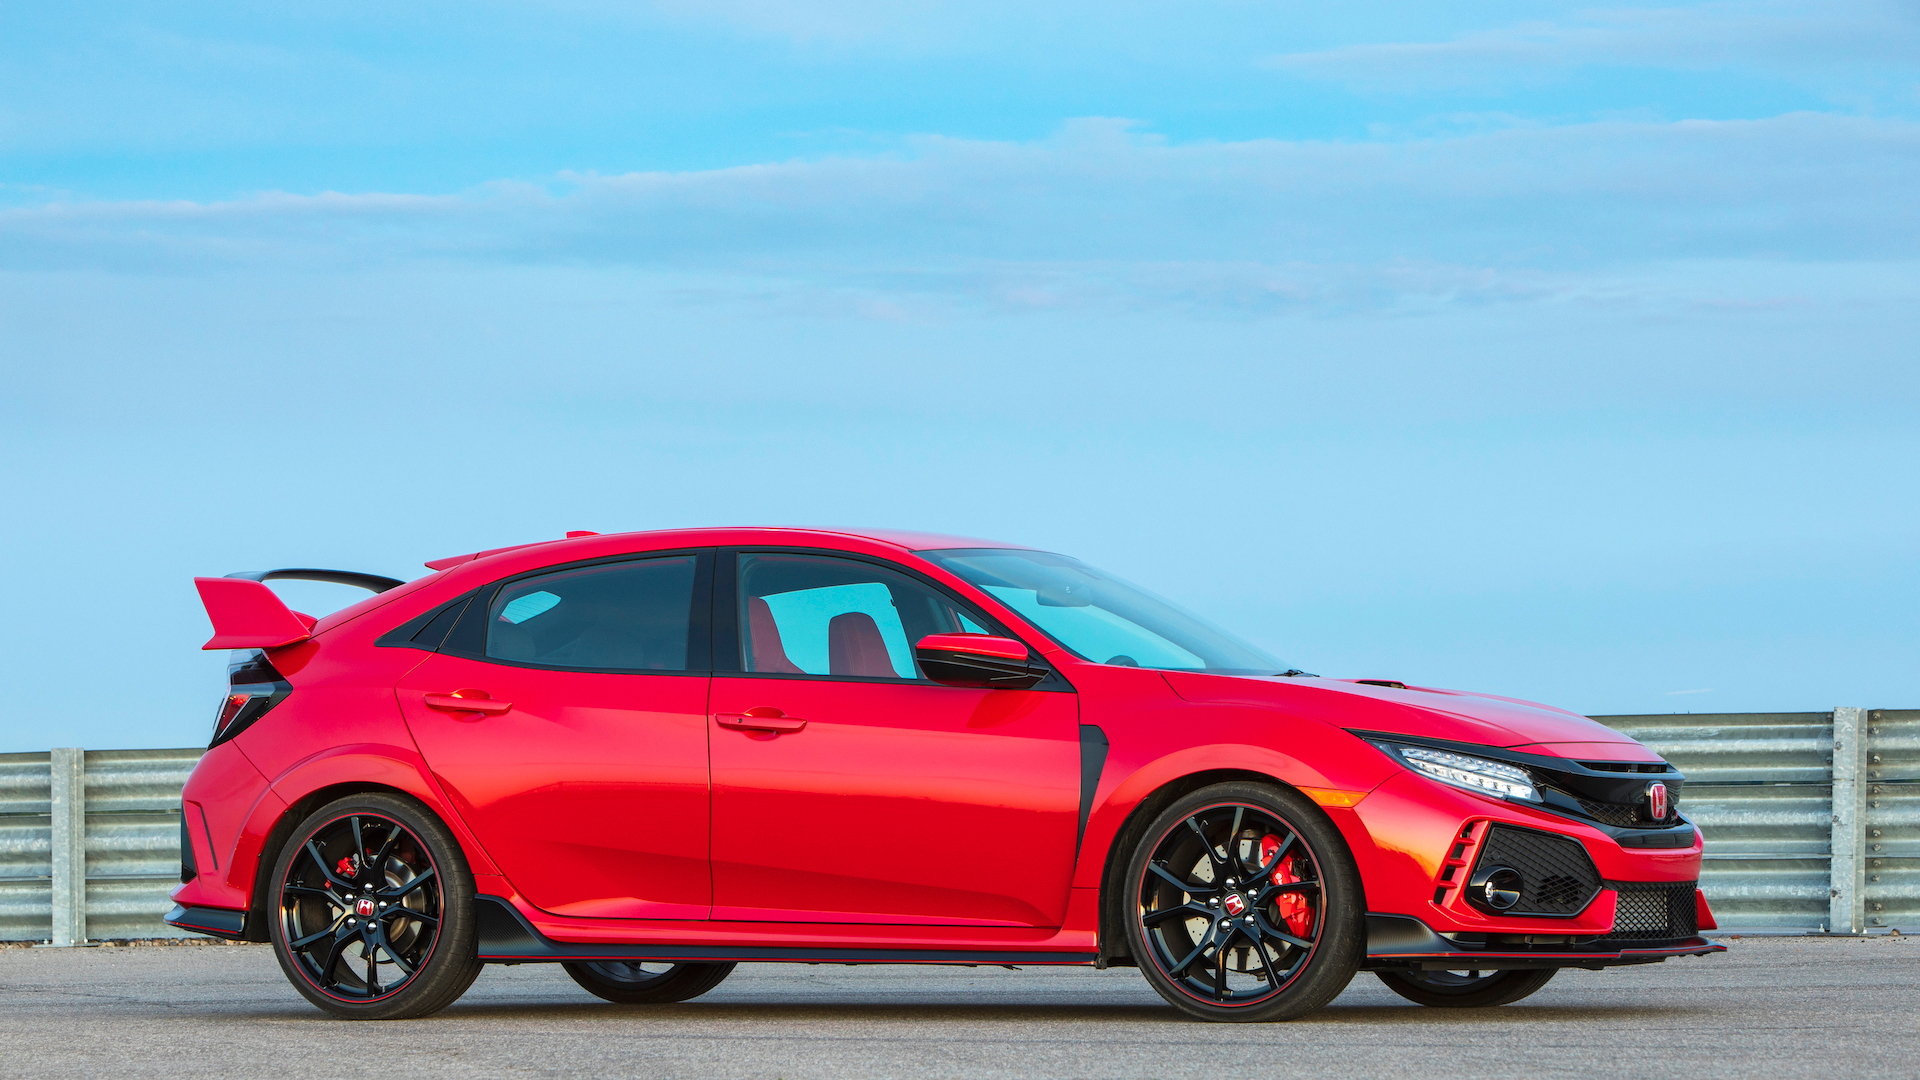 2017 Honda Civic Type R first drive review: Track attacker